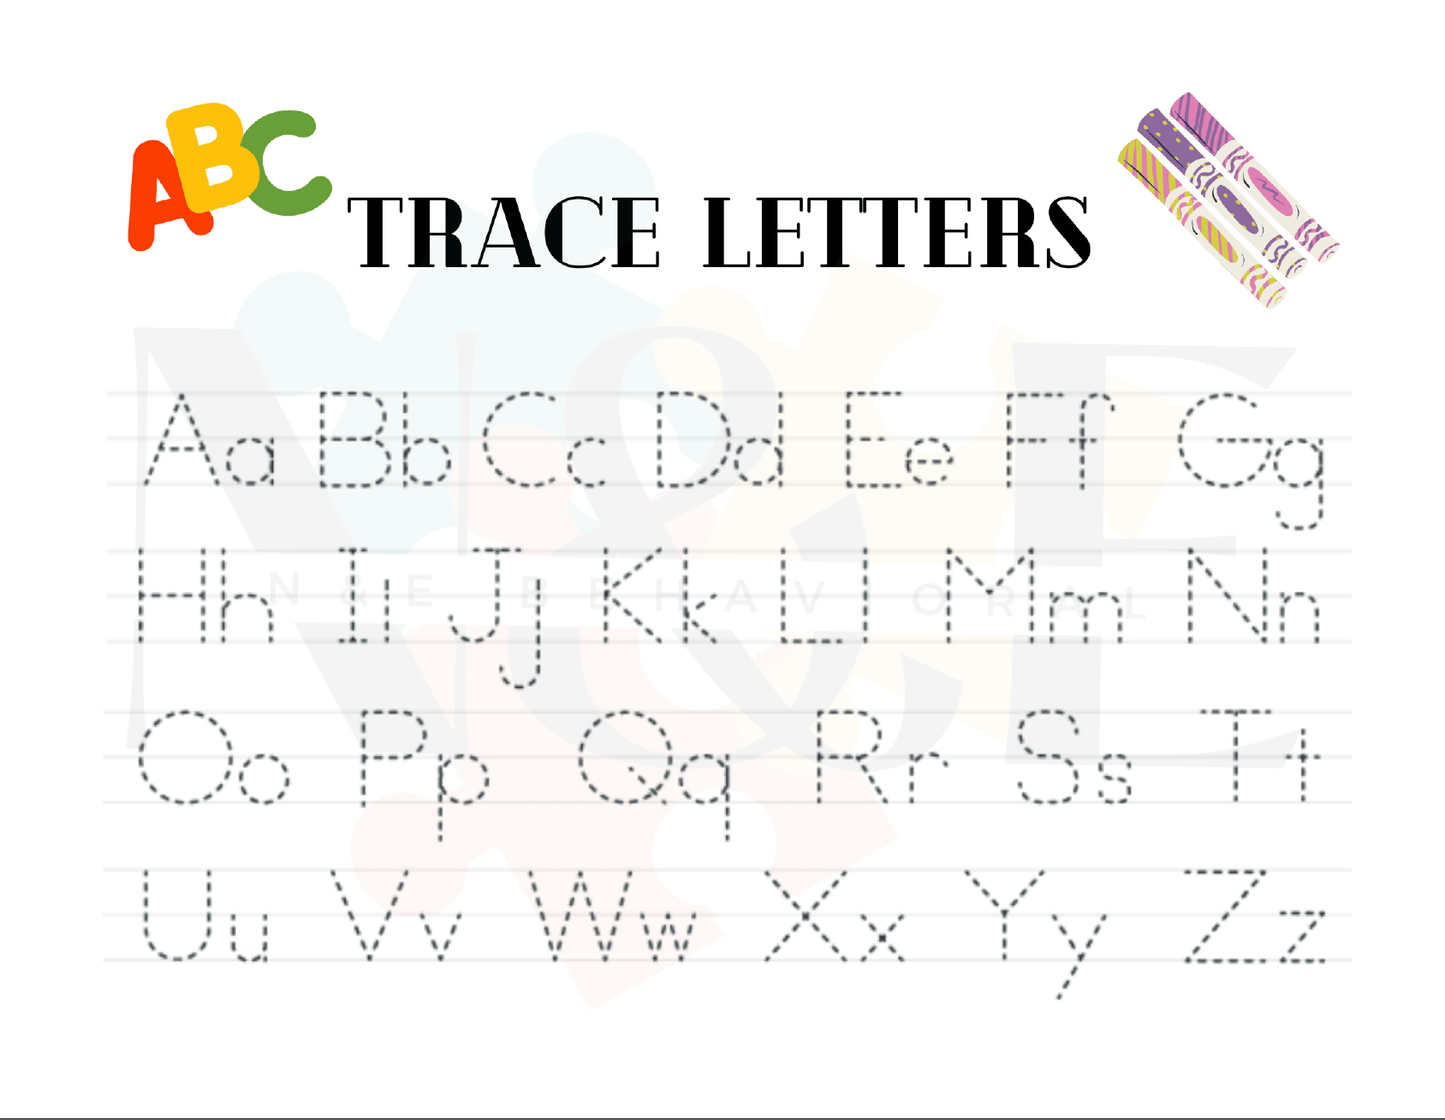 Tracing Letters - N&E Behavioral